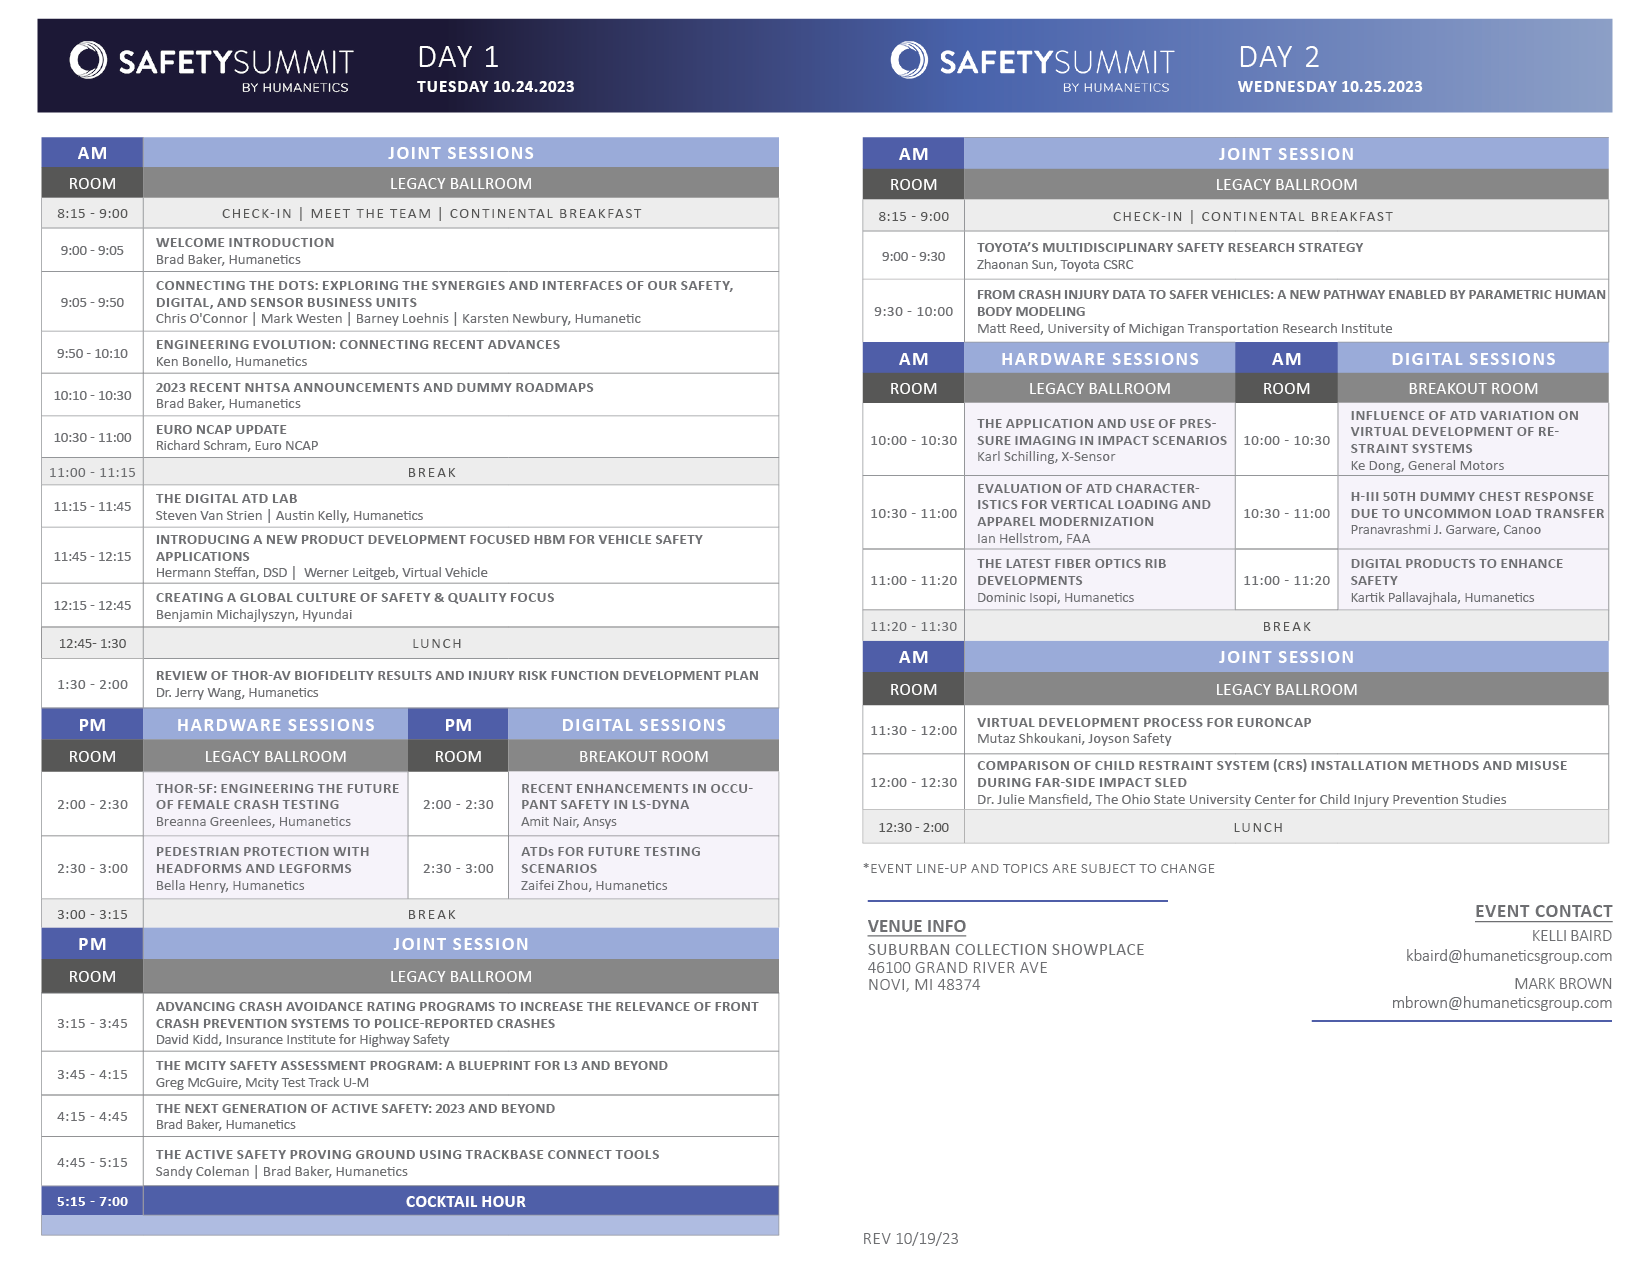 North American Safety Summit Agenda as of Sept. 26, 2023